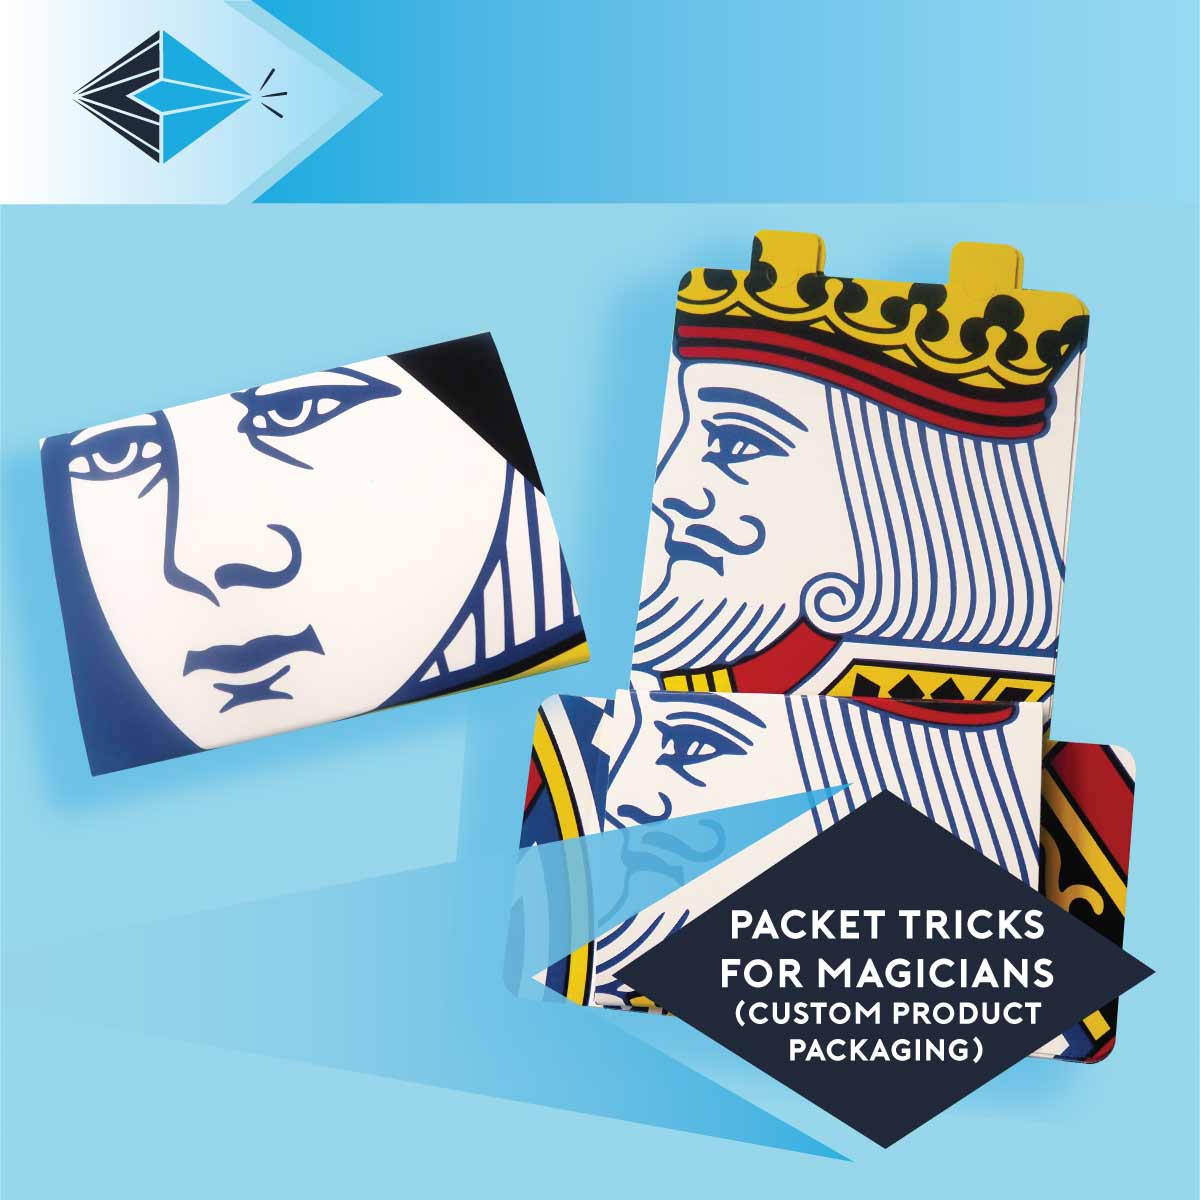 Custom Product Packaging Services For Magicians Showcasing Two Packet Trick Boxes Ready To Store Up To 8 Playing Cards